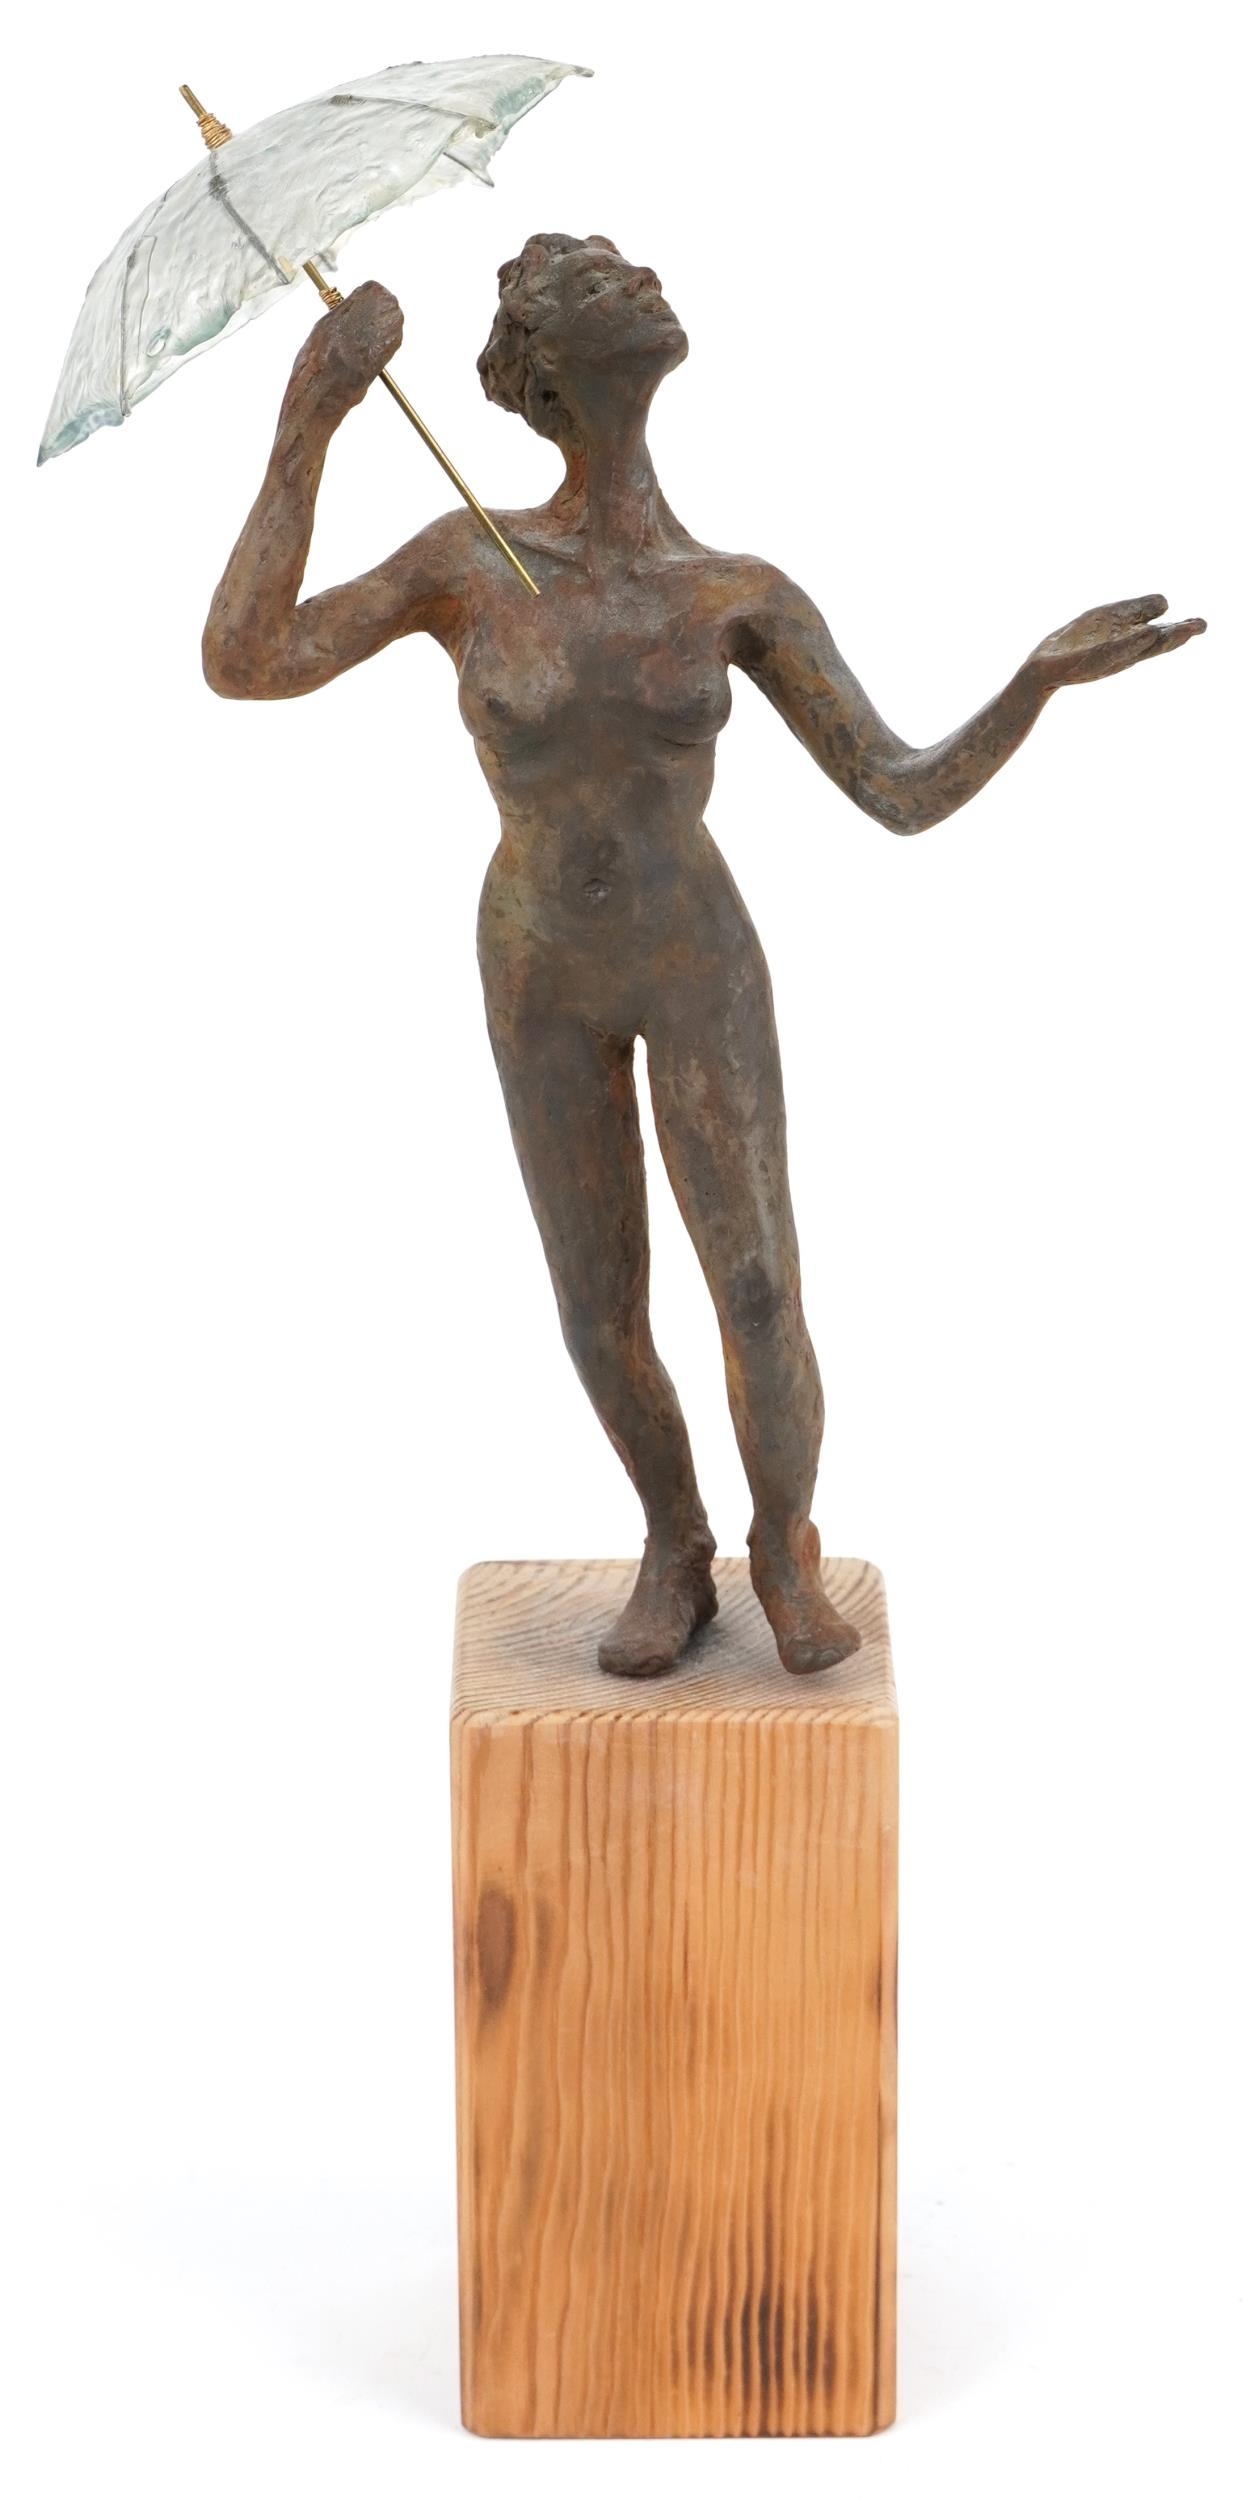 Neil Wilkinson, contemporary Brutalist cast resin sculpture of a nude female holding an umbrella - Image 2 of 4